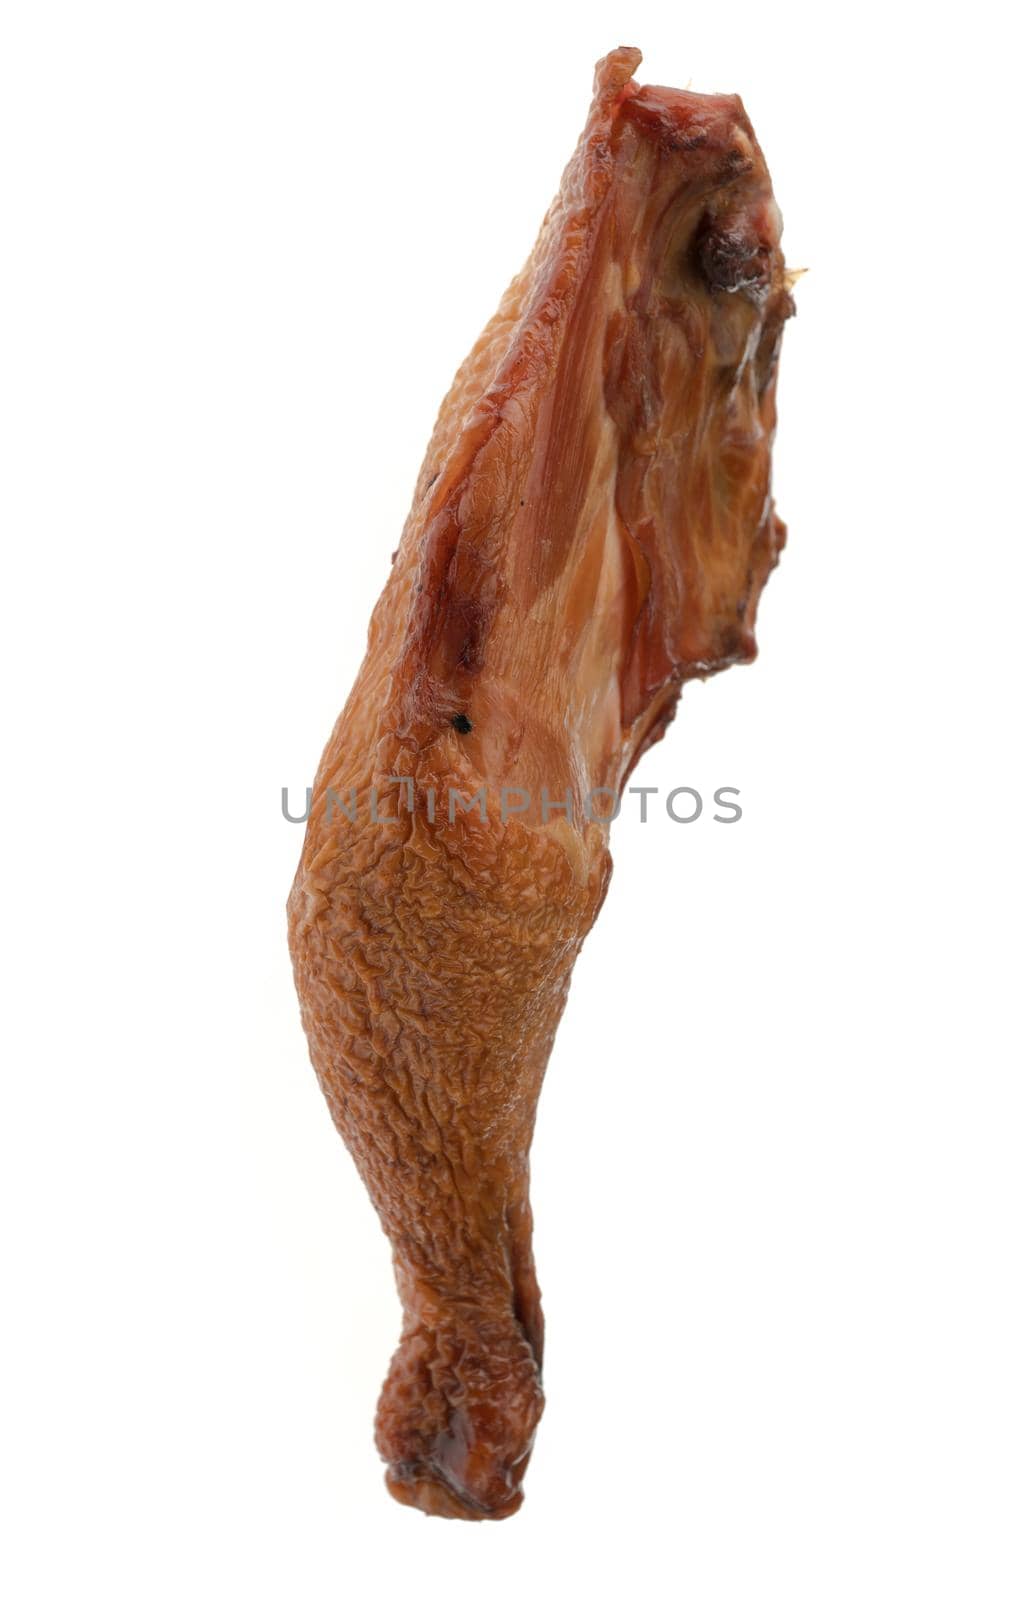 Smoked chicken meat, chicken legs, quarter, on a white plate isolated